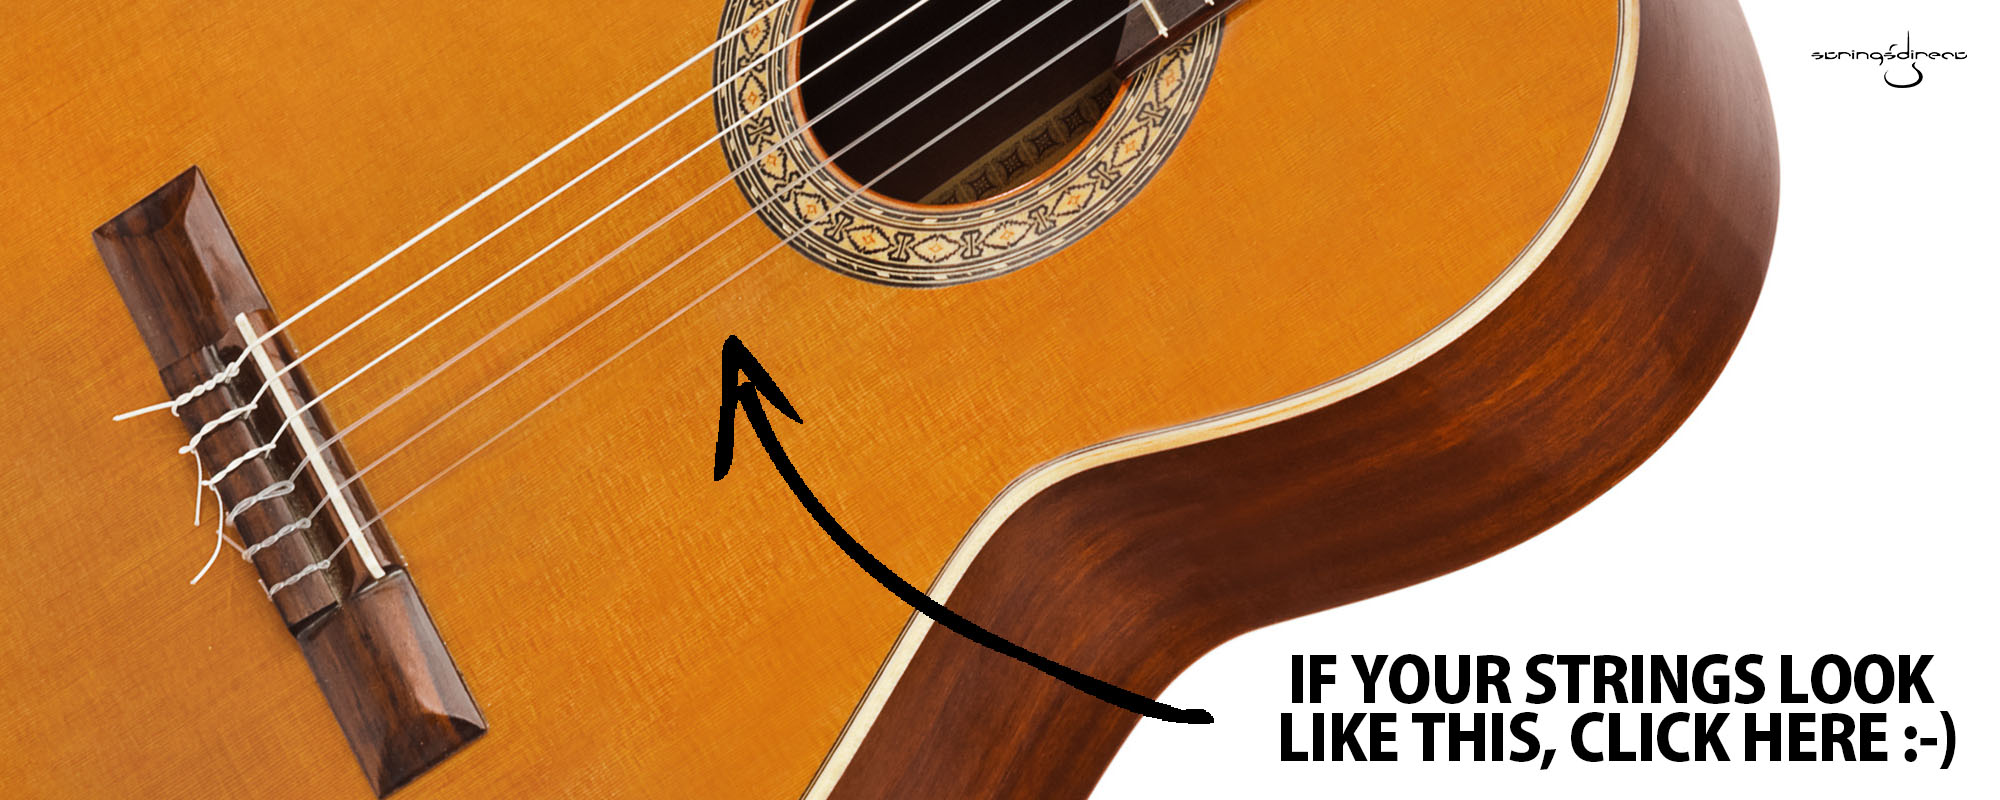 If your strings look like this click here - classical guitar buyers guide link